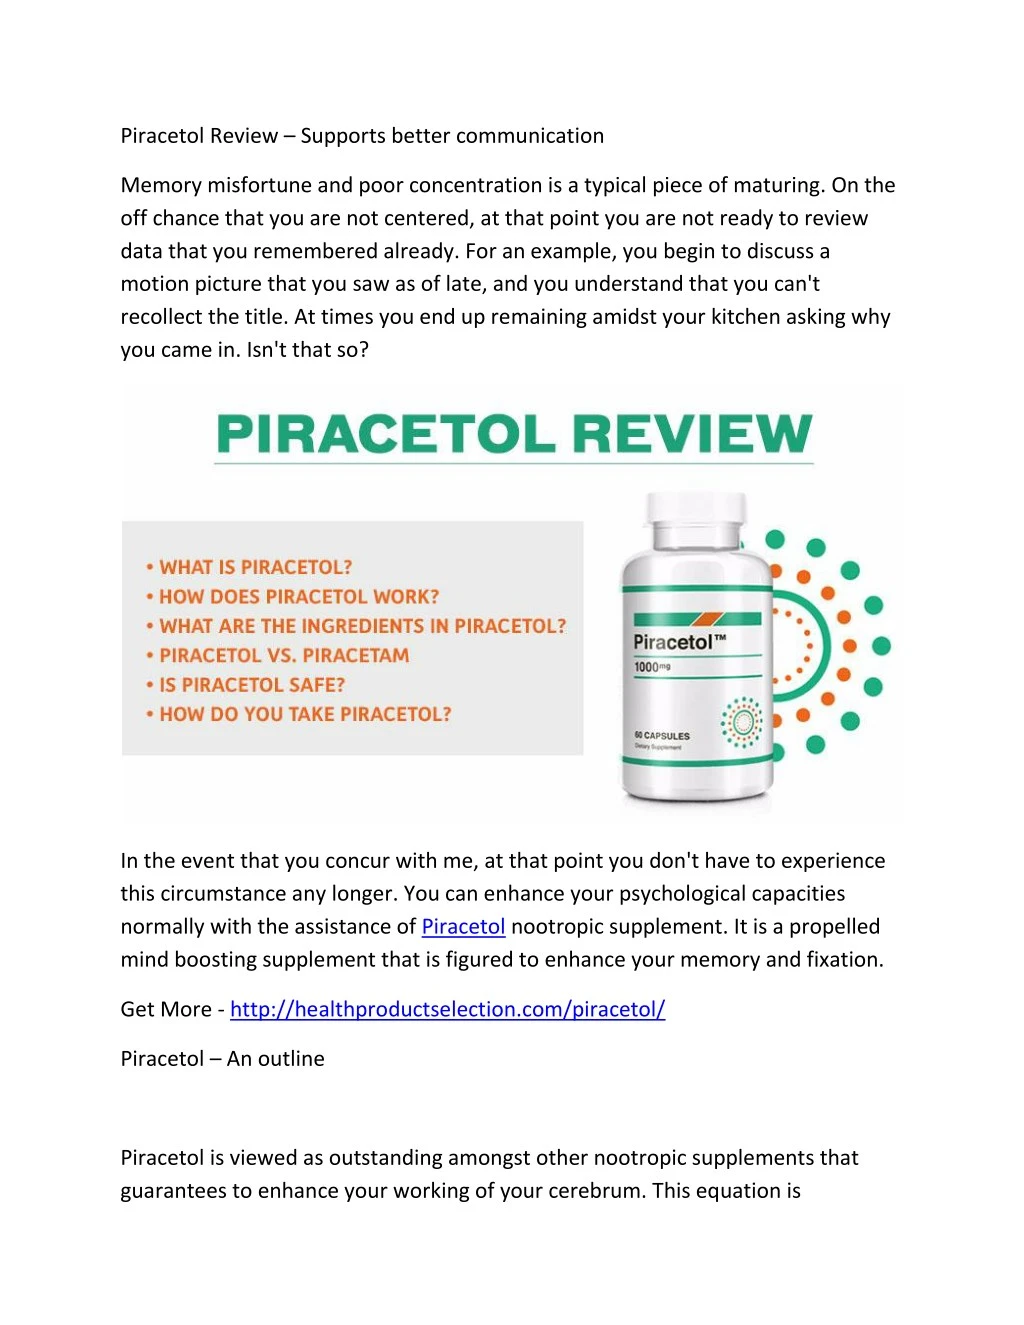 piracetol review supports better communication